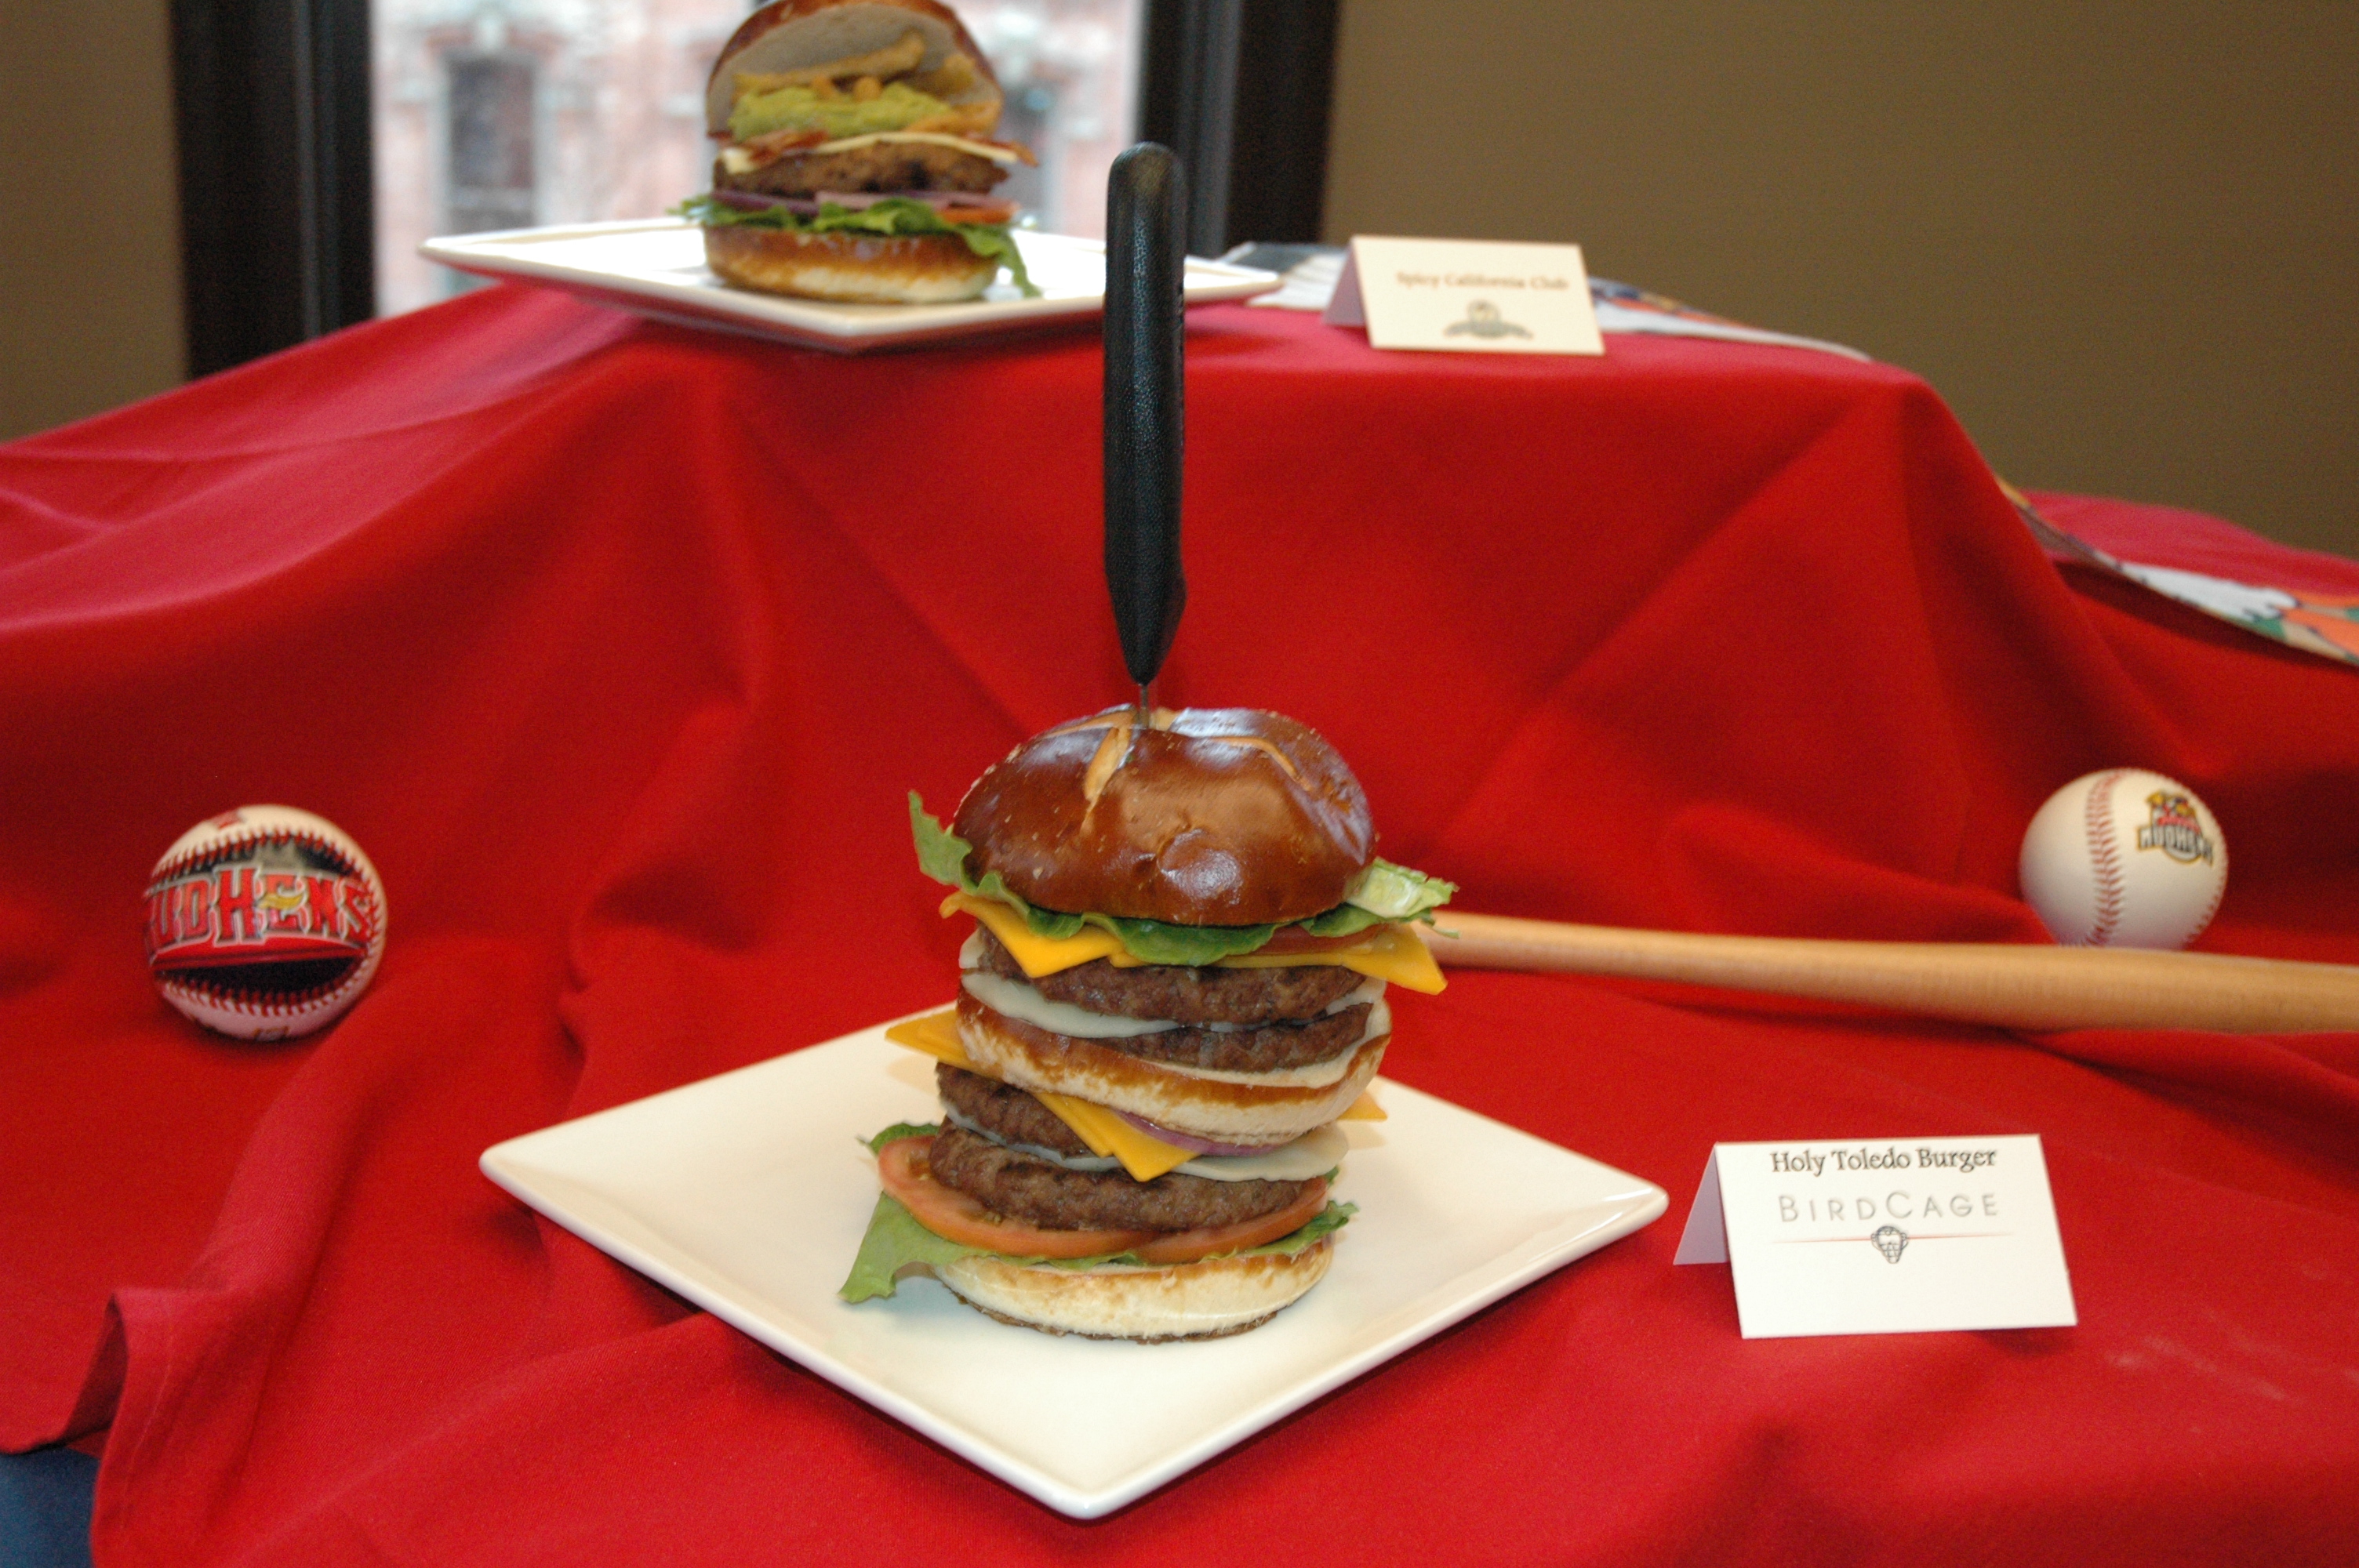 It could certainly be called the Holy “Tall-edo” Burger. Easily standing at 6+ inches tall, this culinary delight needs the support of a steak knife to remain upright.